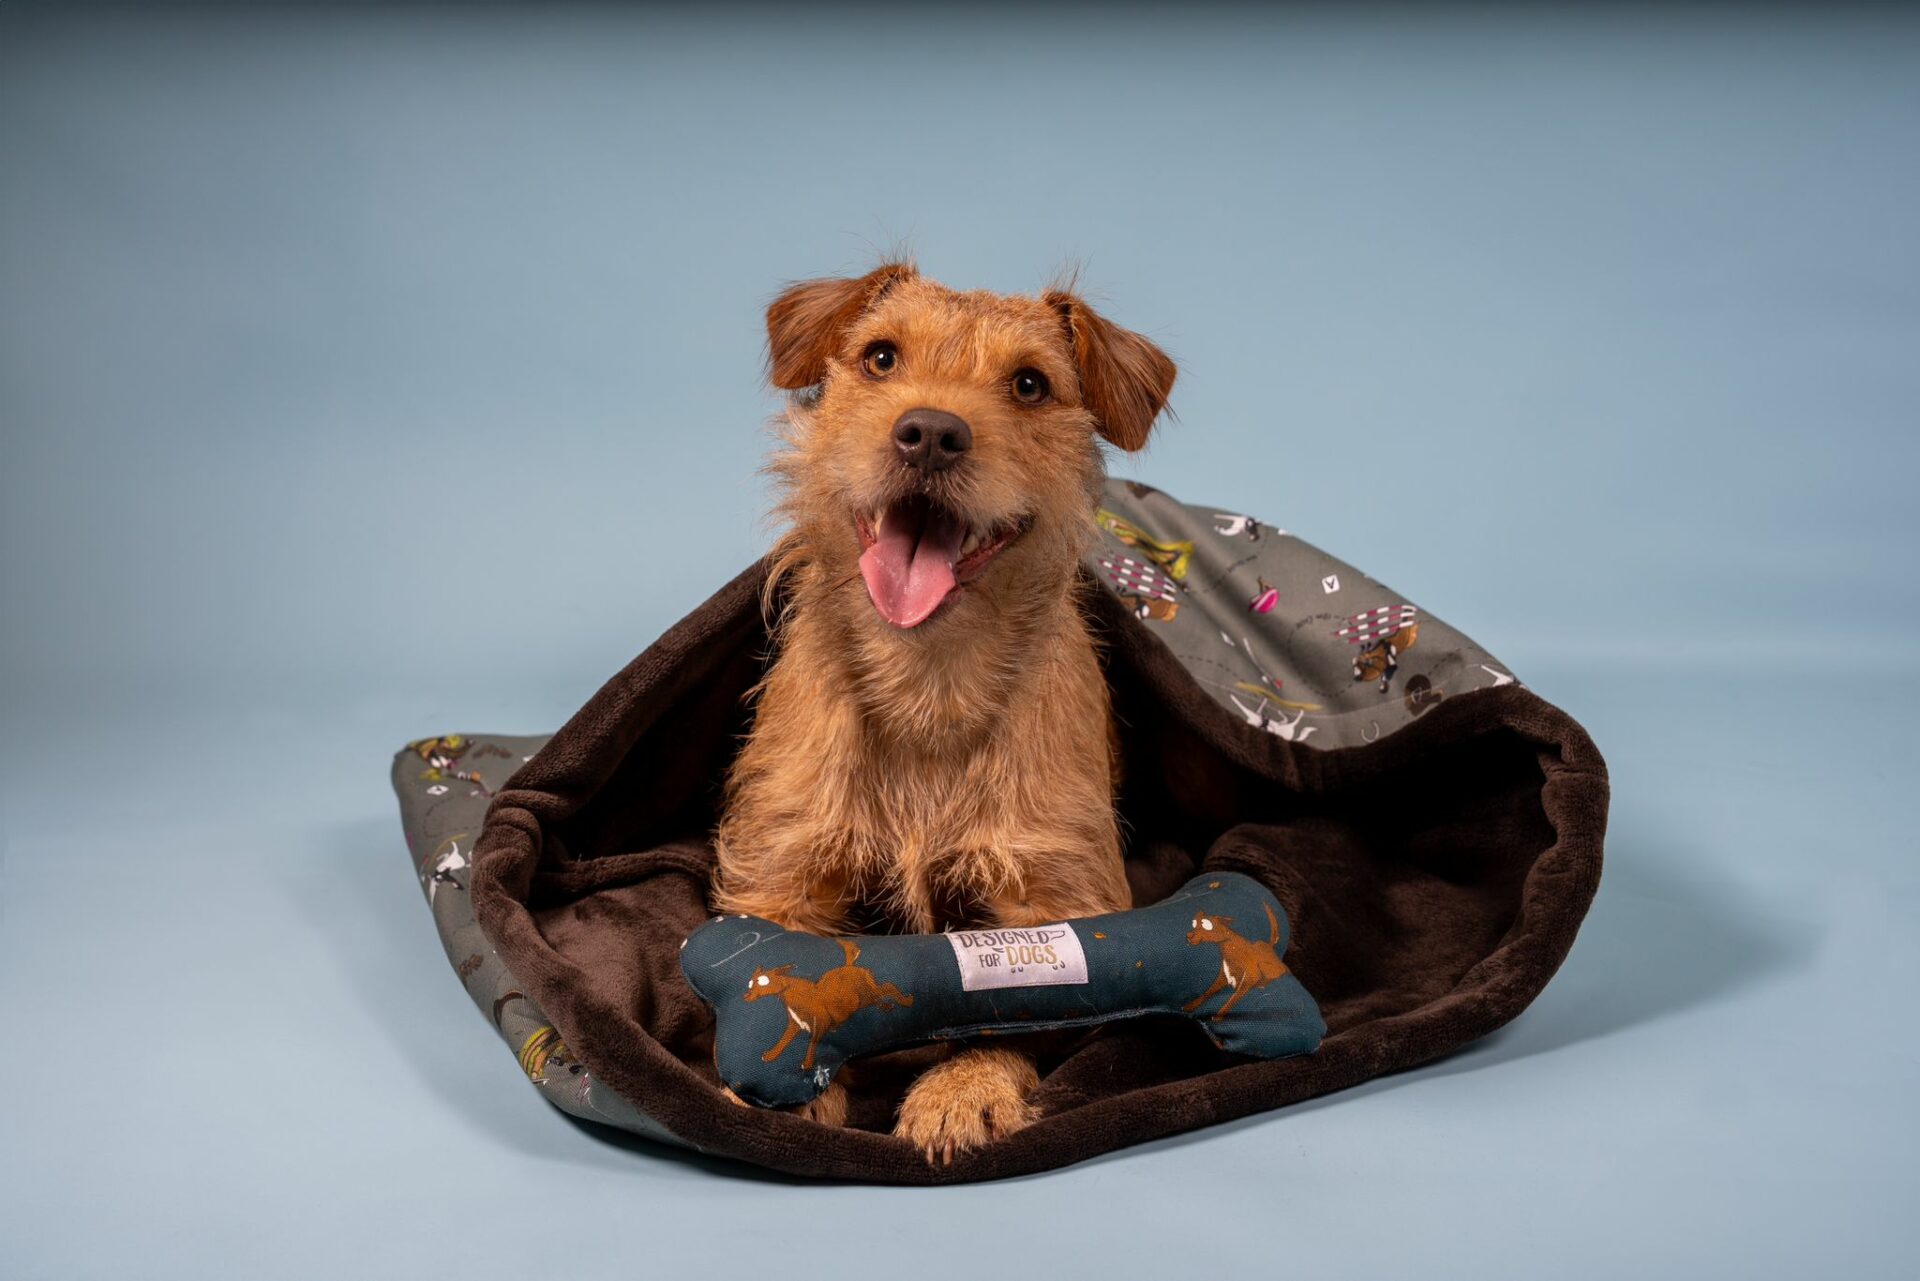 Dog snuggle sack with red patterdale terrier dog and blue bone toy